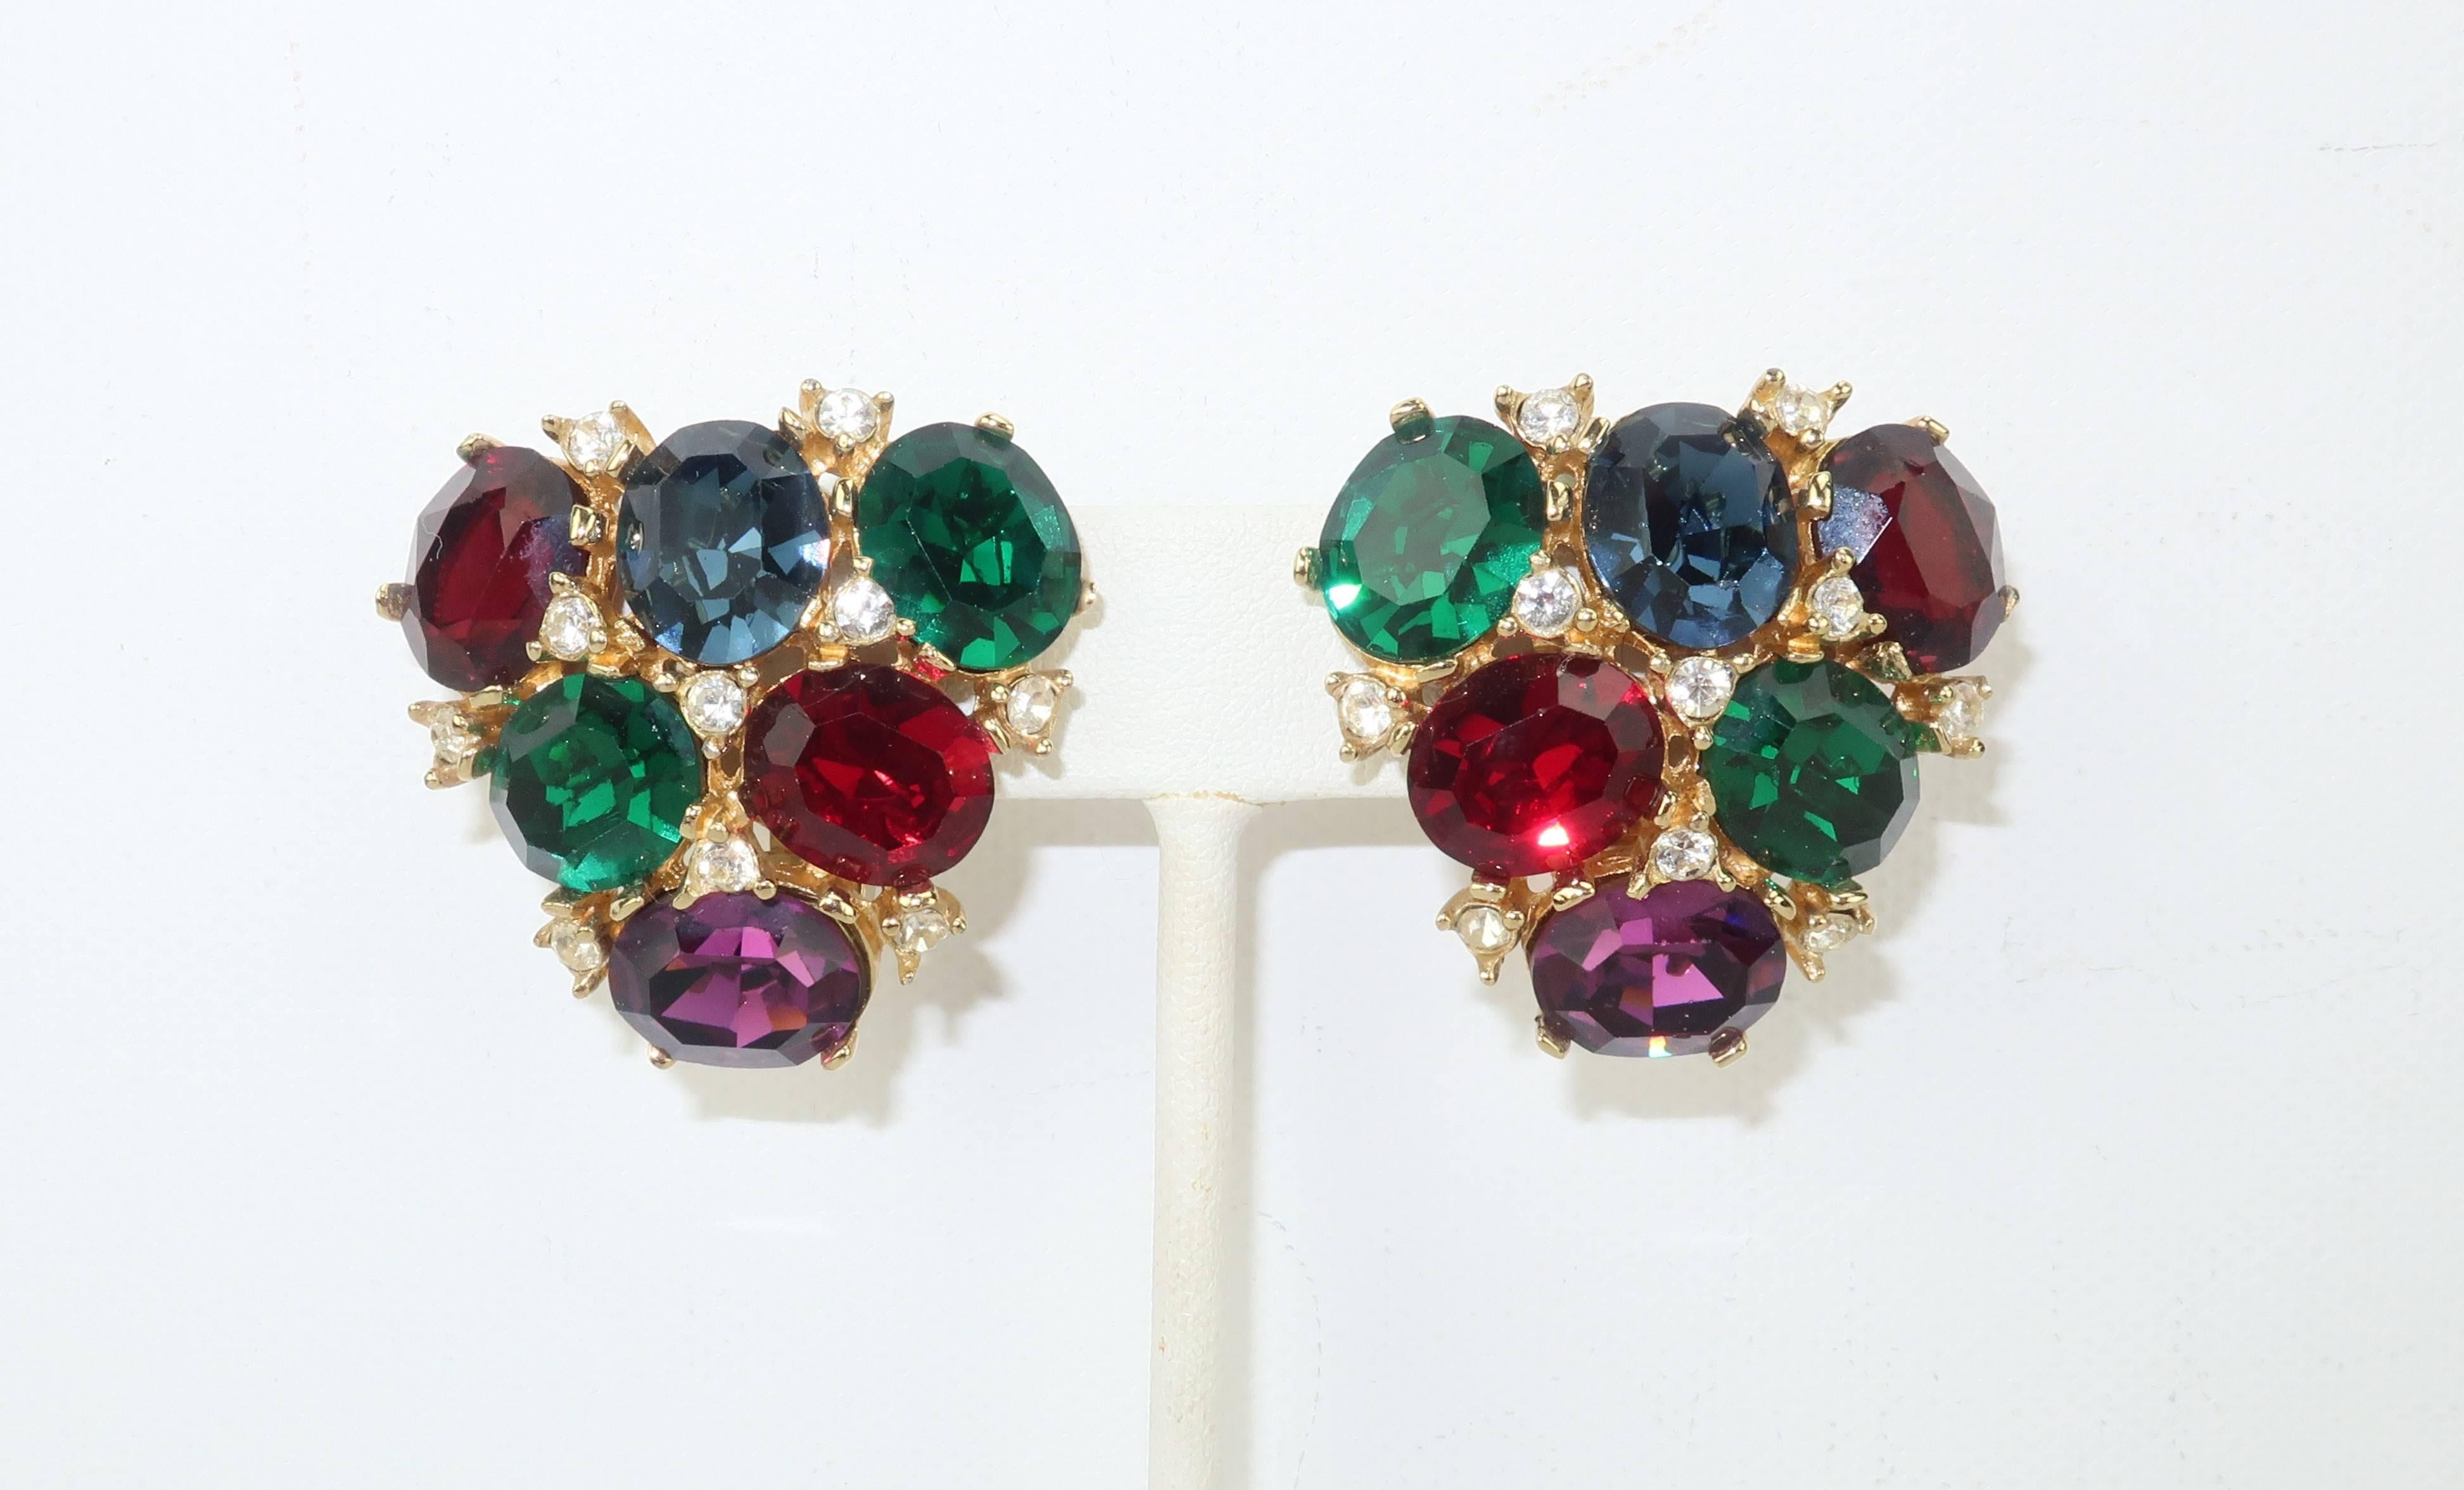 Glorious glamour alert! These clip on earrings are by Ciner, an American costume jewelry company known for producing high quality accessories since the 1930's.  The inverted gilt metal triangular shape is constructed of multi-color crystal